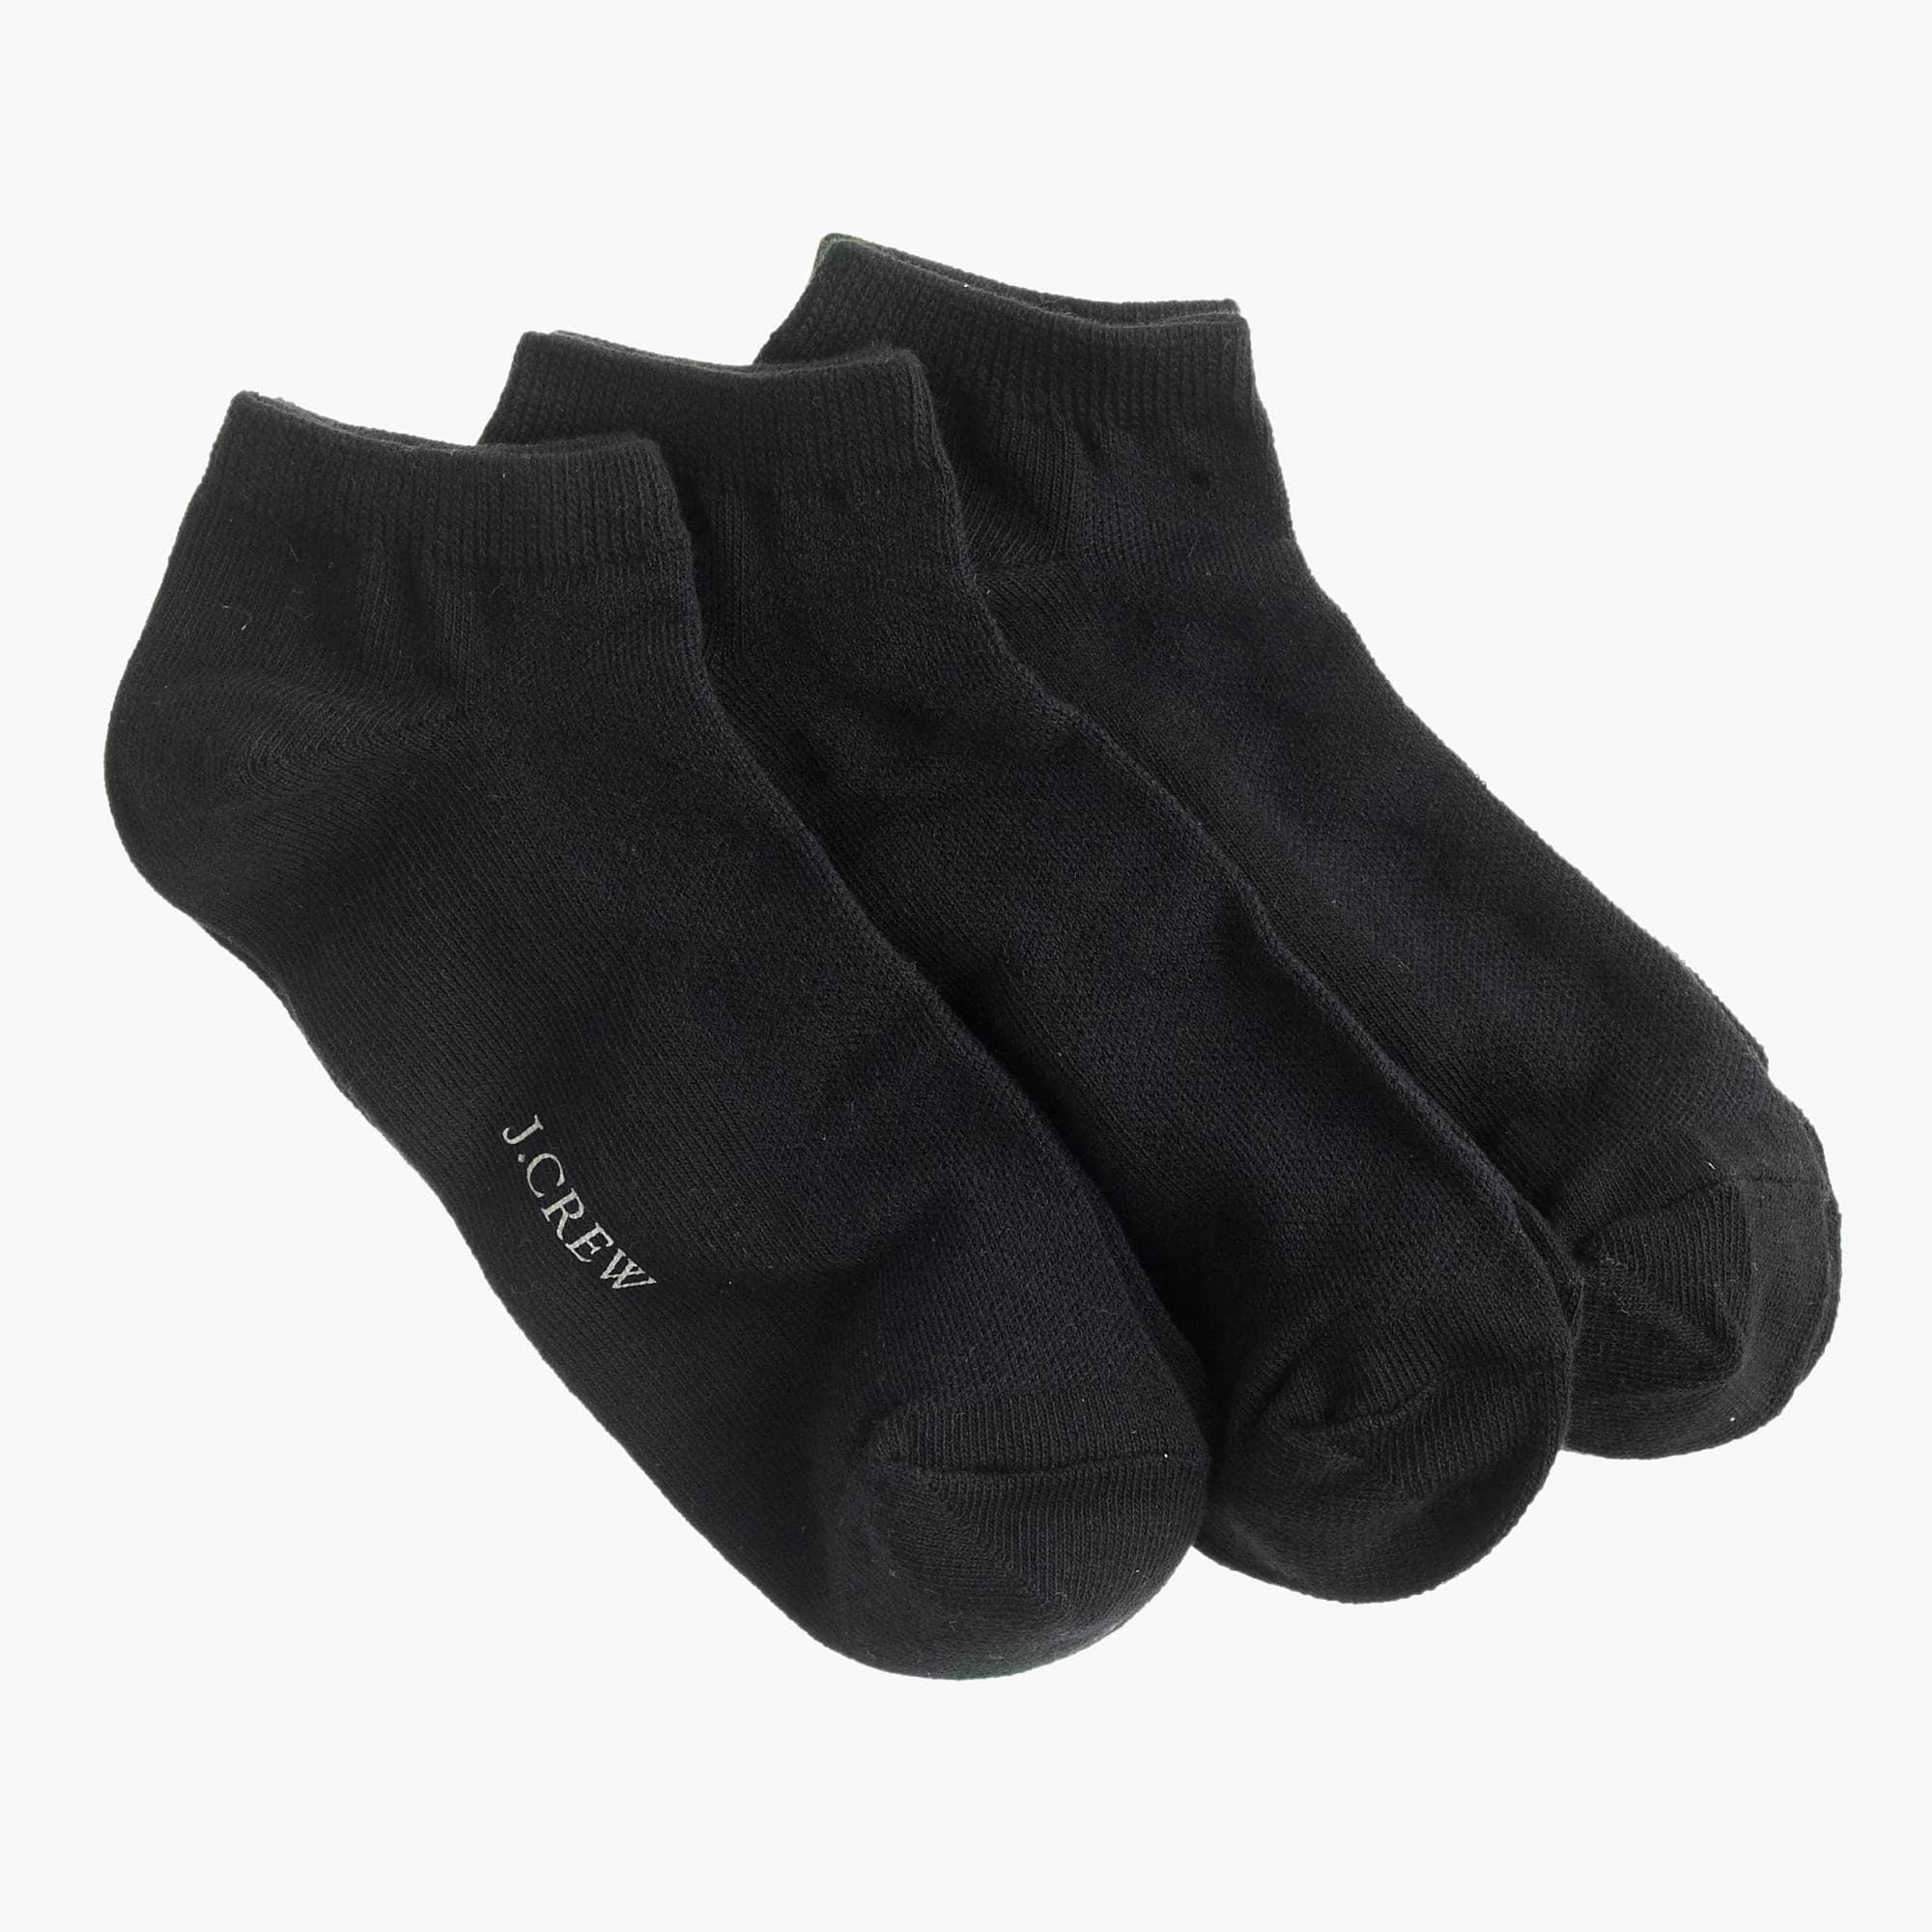 J.Crew Synthetic Ankle Socks Three-pack in Black - Lyst